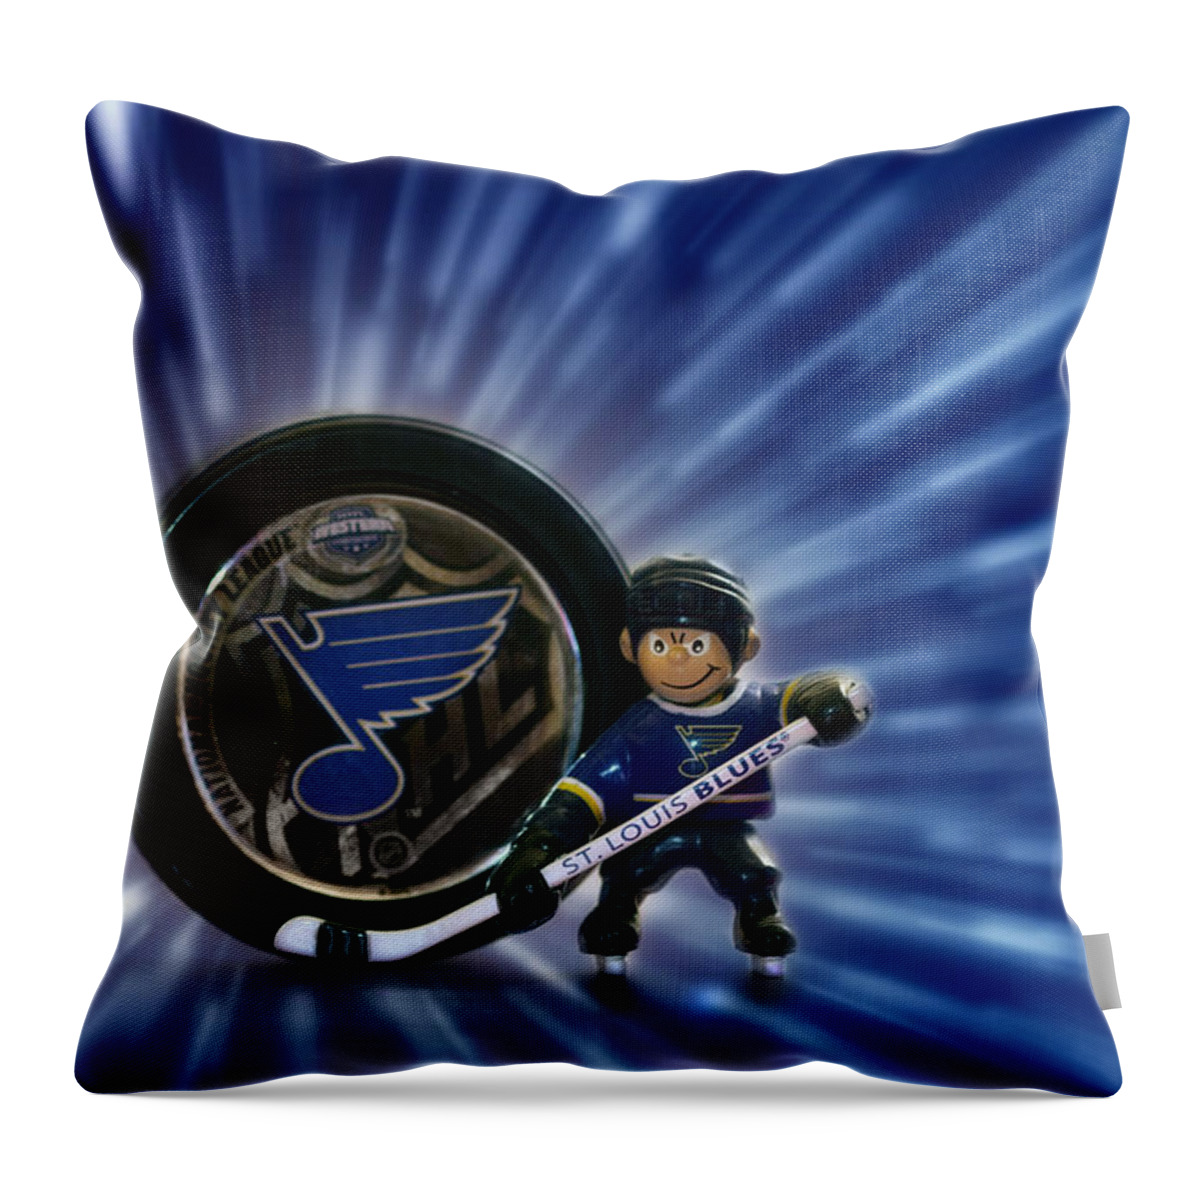 Nhl Throw Pillow featuring the photograph Bleed Blue by Evelina Kremsdorf